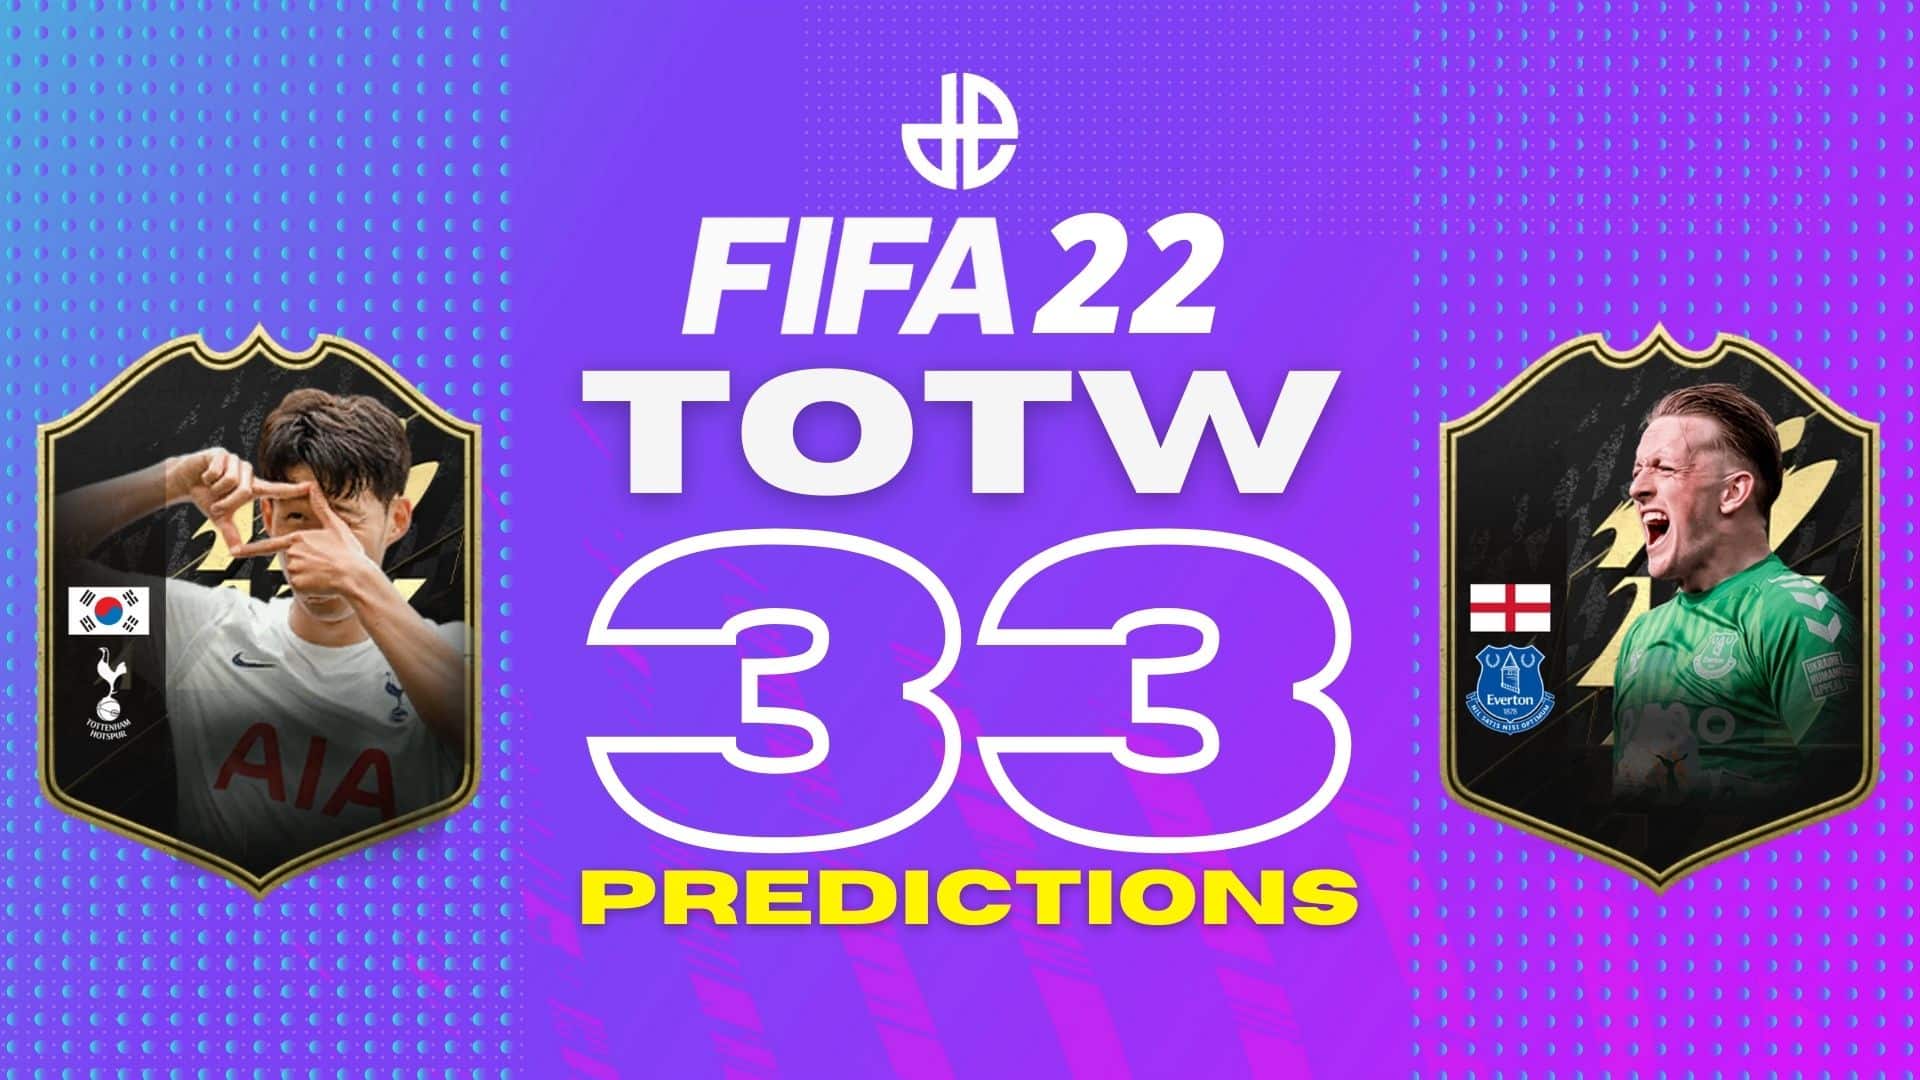 FIFA 22 TOTW 33 cards and predictions